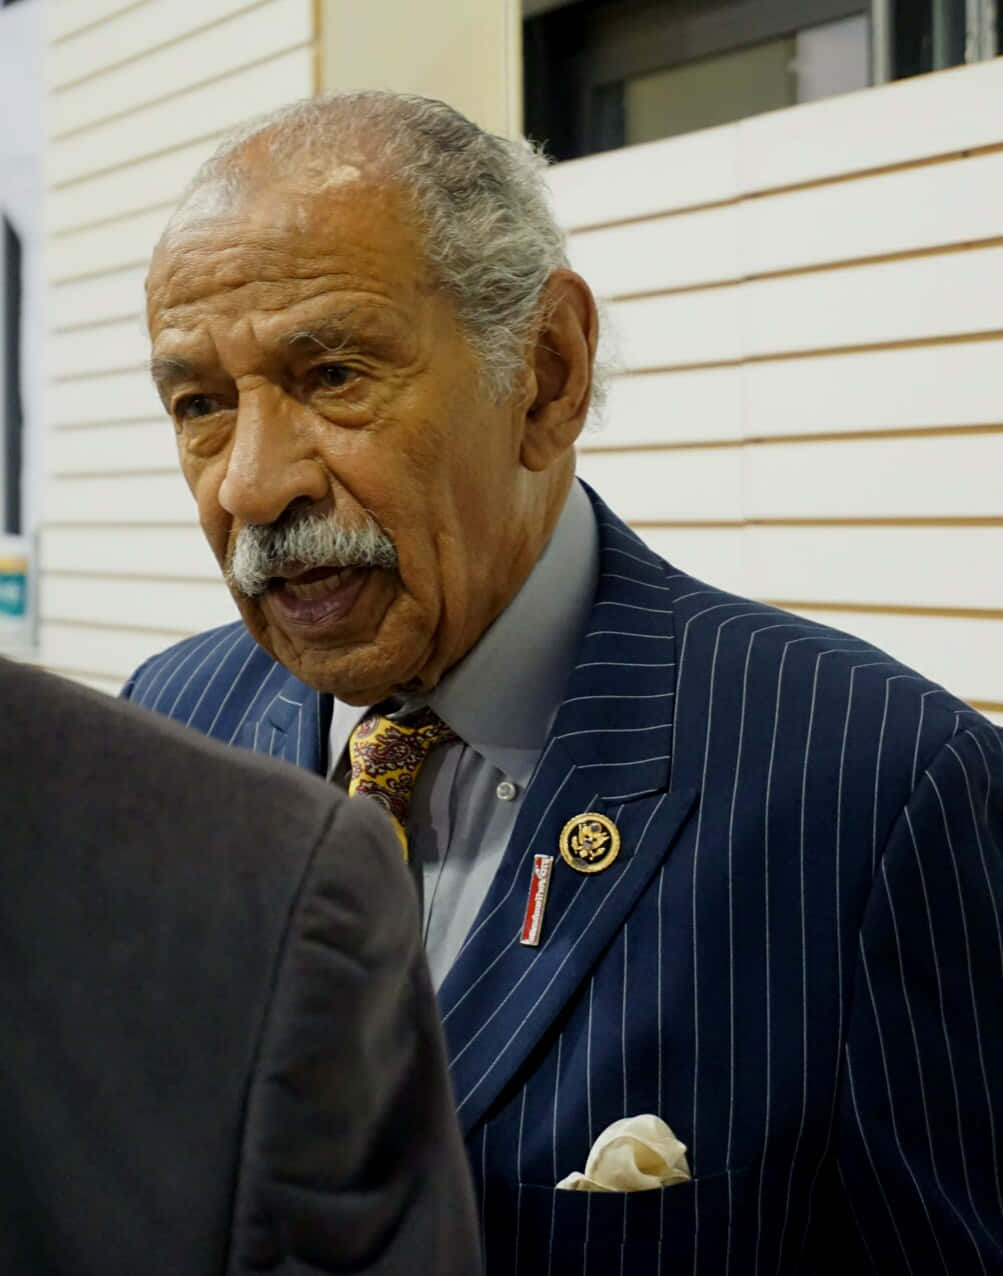 Caption: Engrossed John Conyers During A Public Event Wallpaper